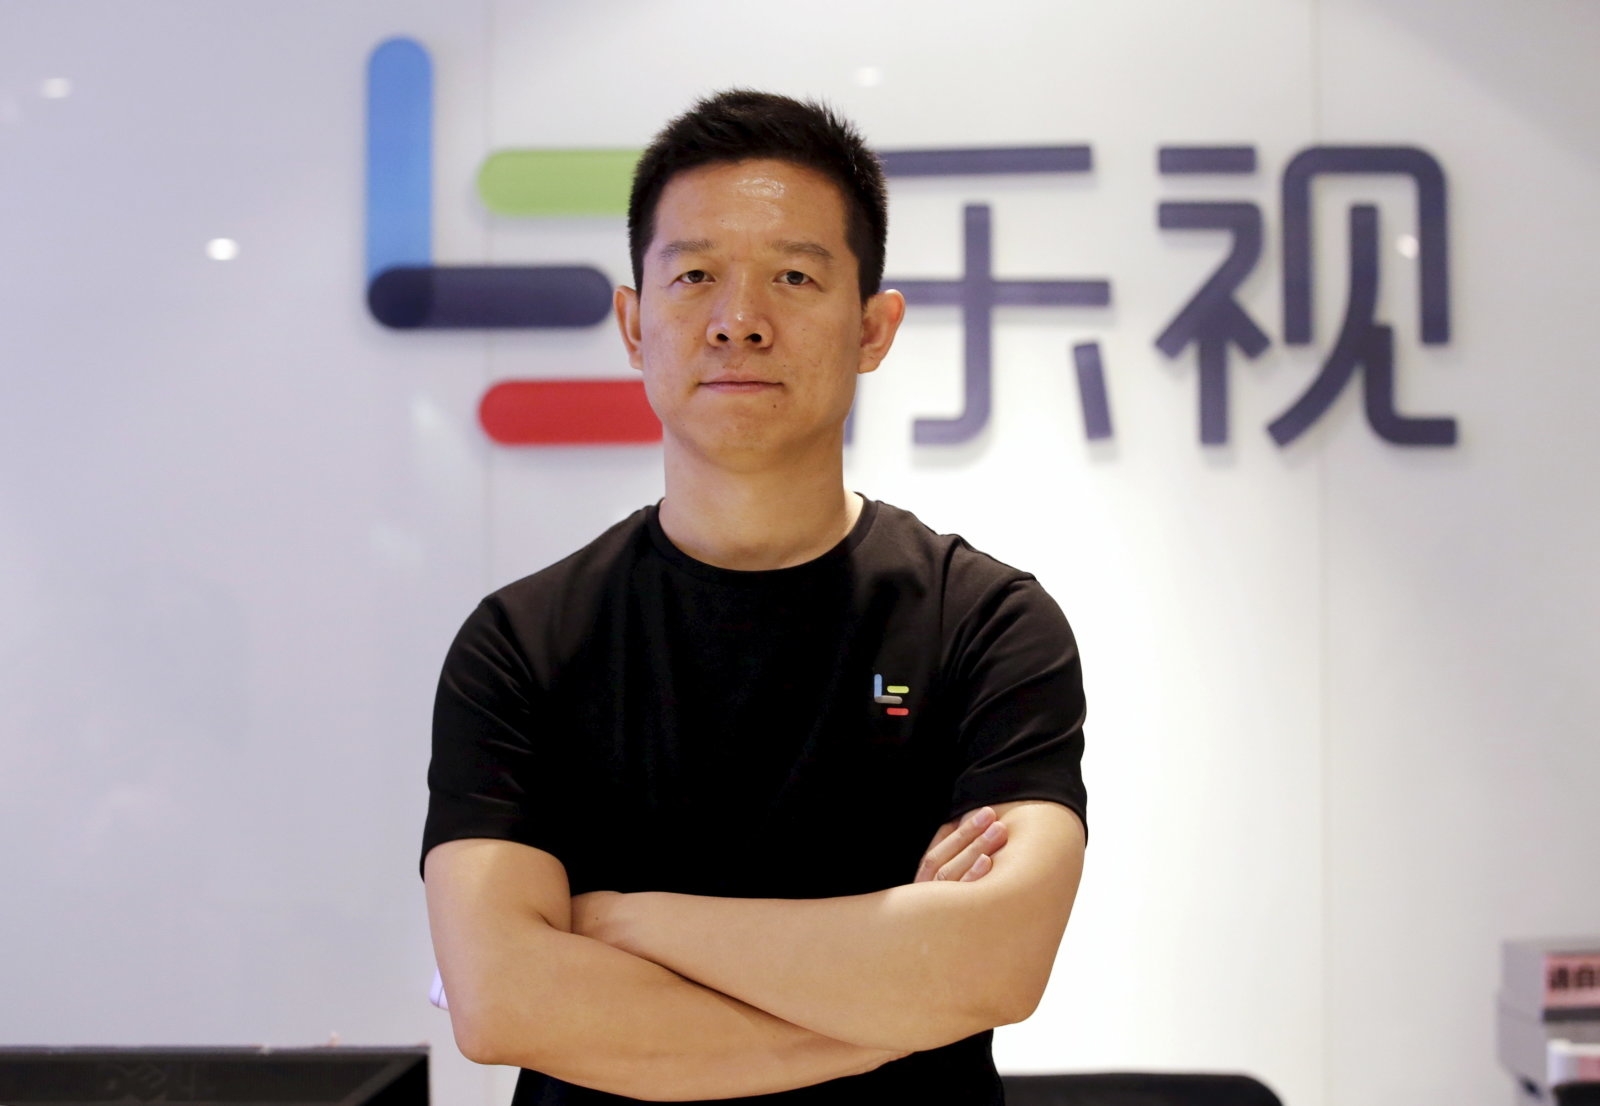 LeEco founder ordered to return to China to answer debts | DeviceDaily.com